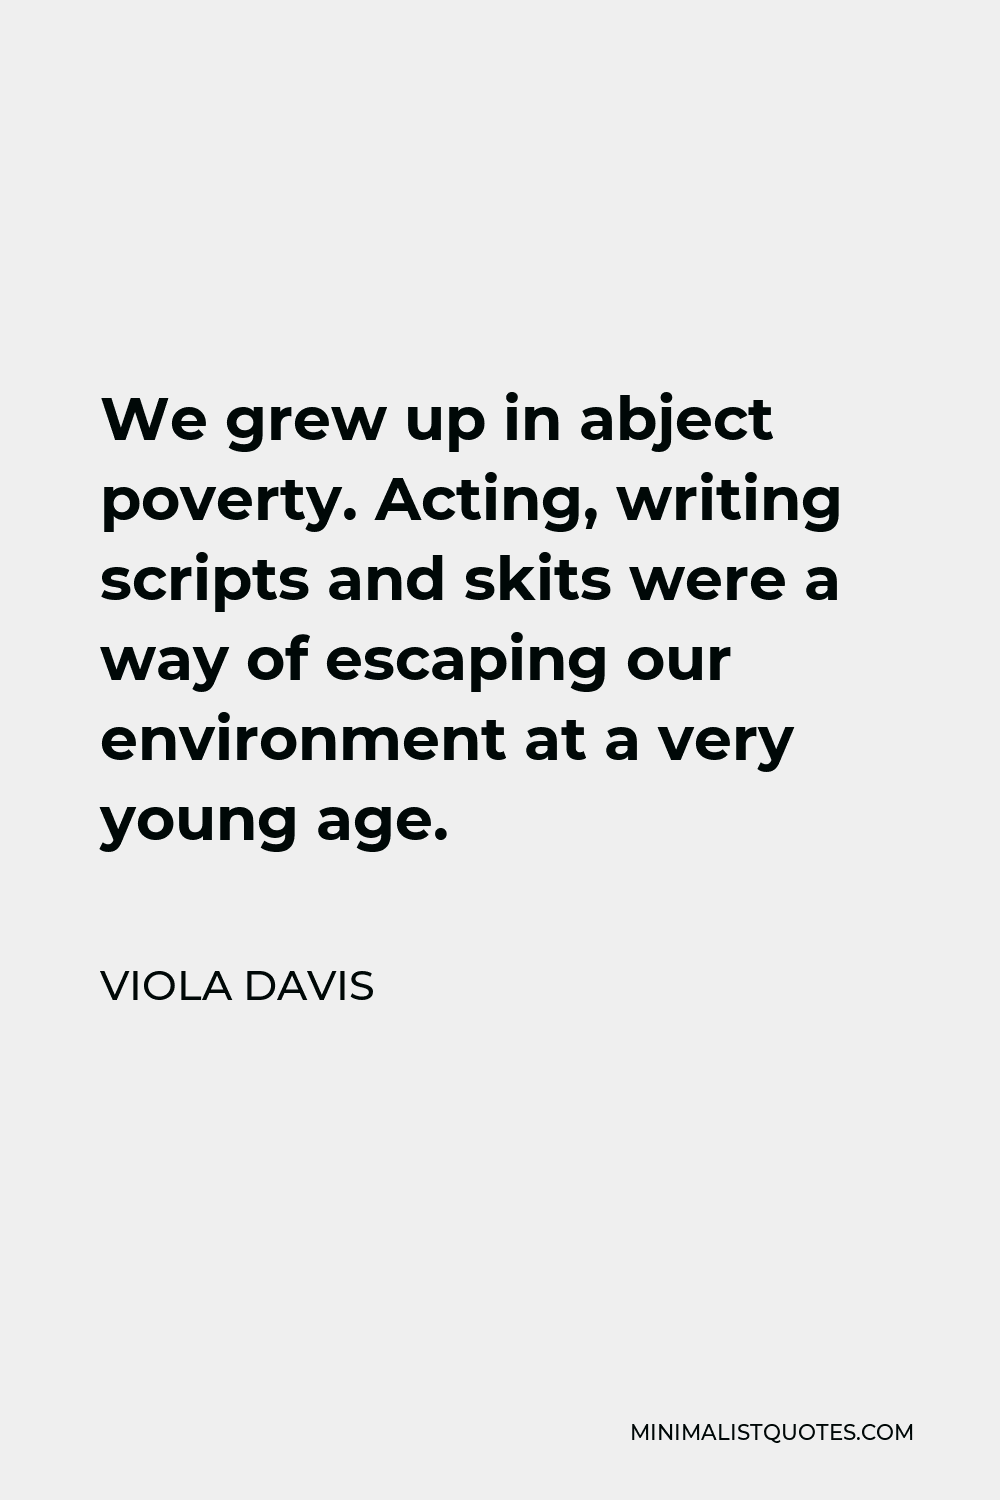 Viola Davis Quote - We grew up in abject poverty. Acting, writing scripts and skits were a way of escaping our environment at a very young age.